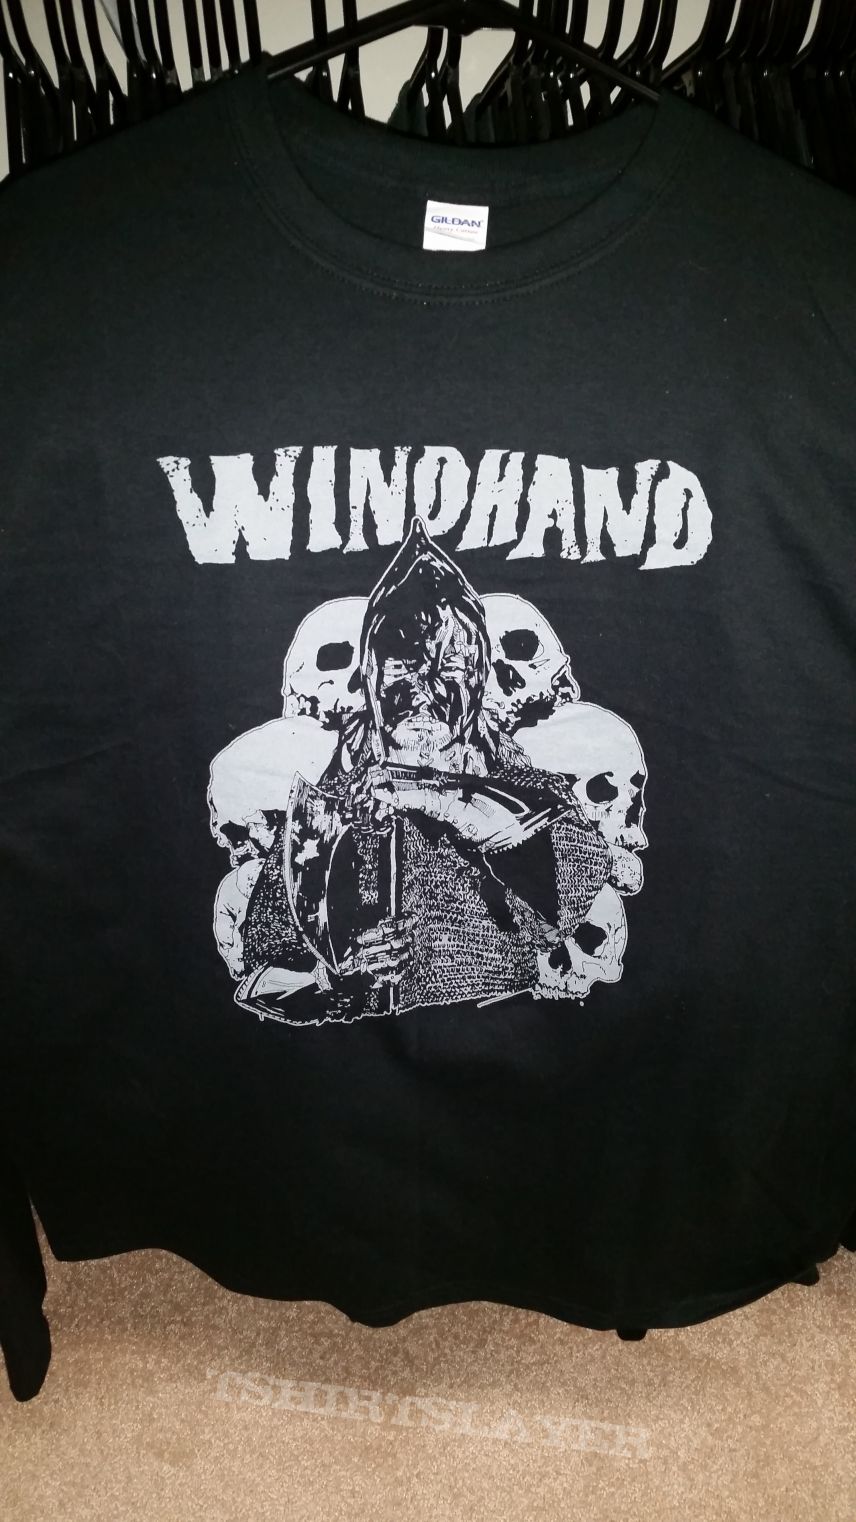 Windhand - Axeman